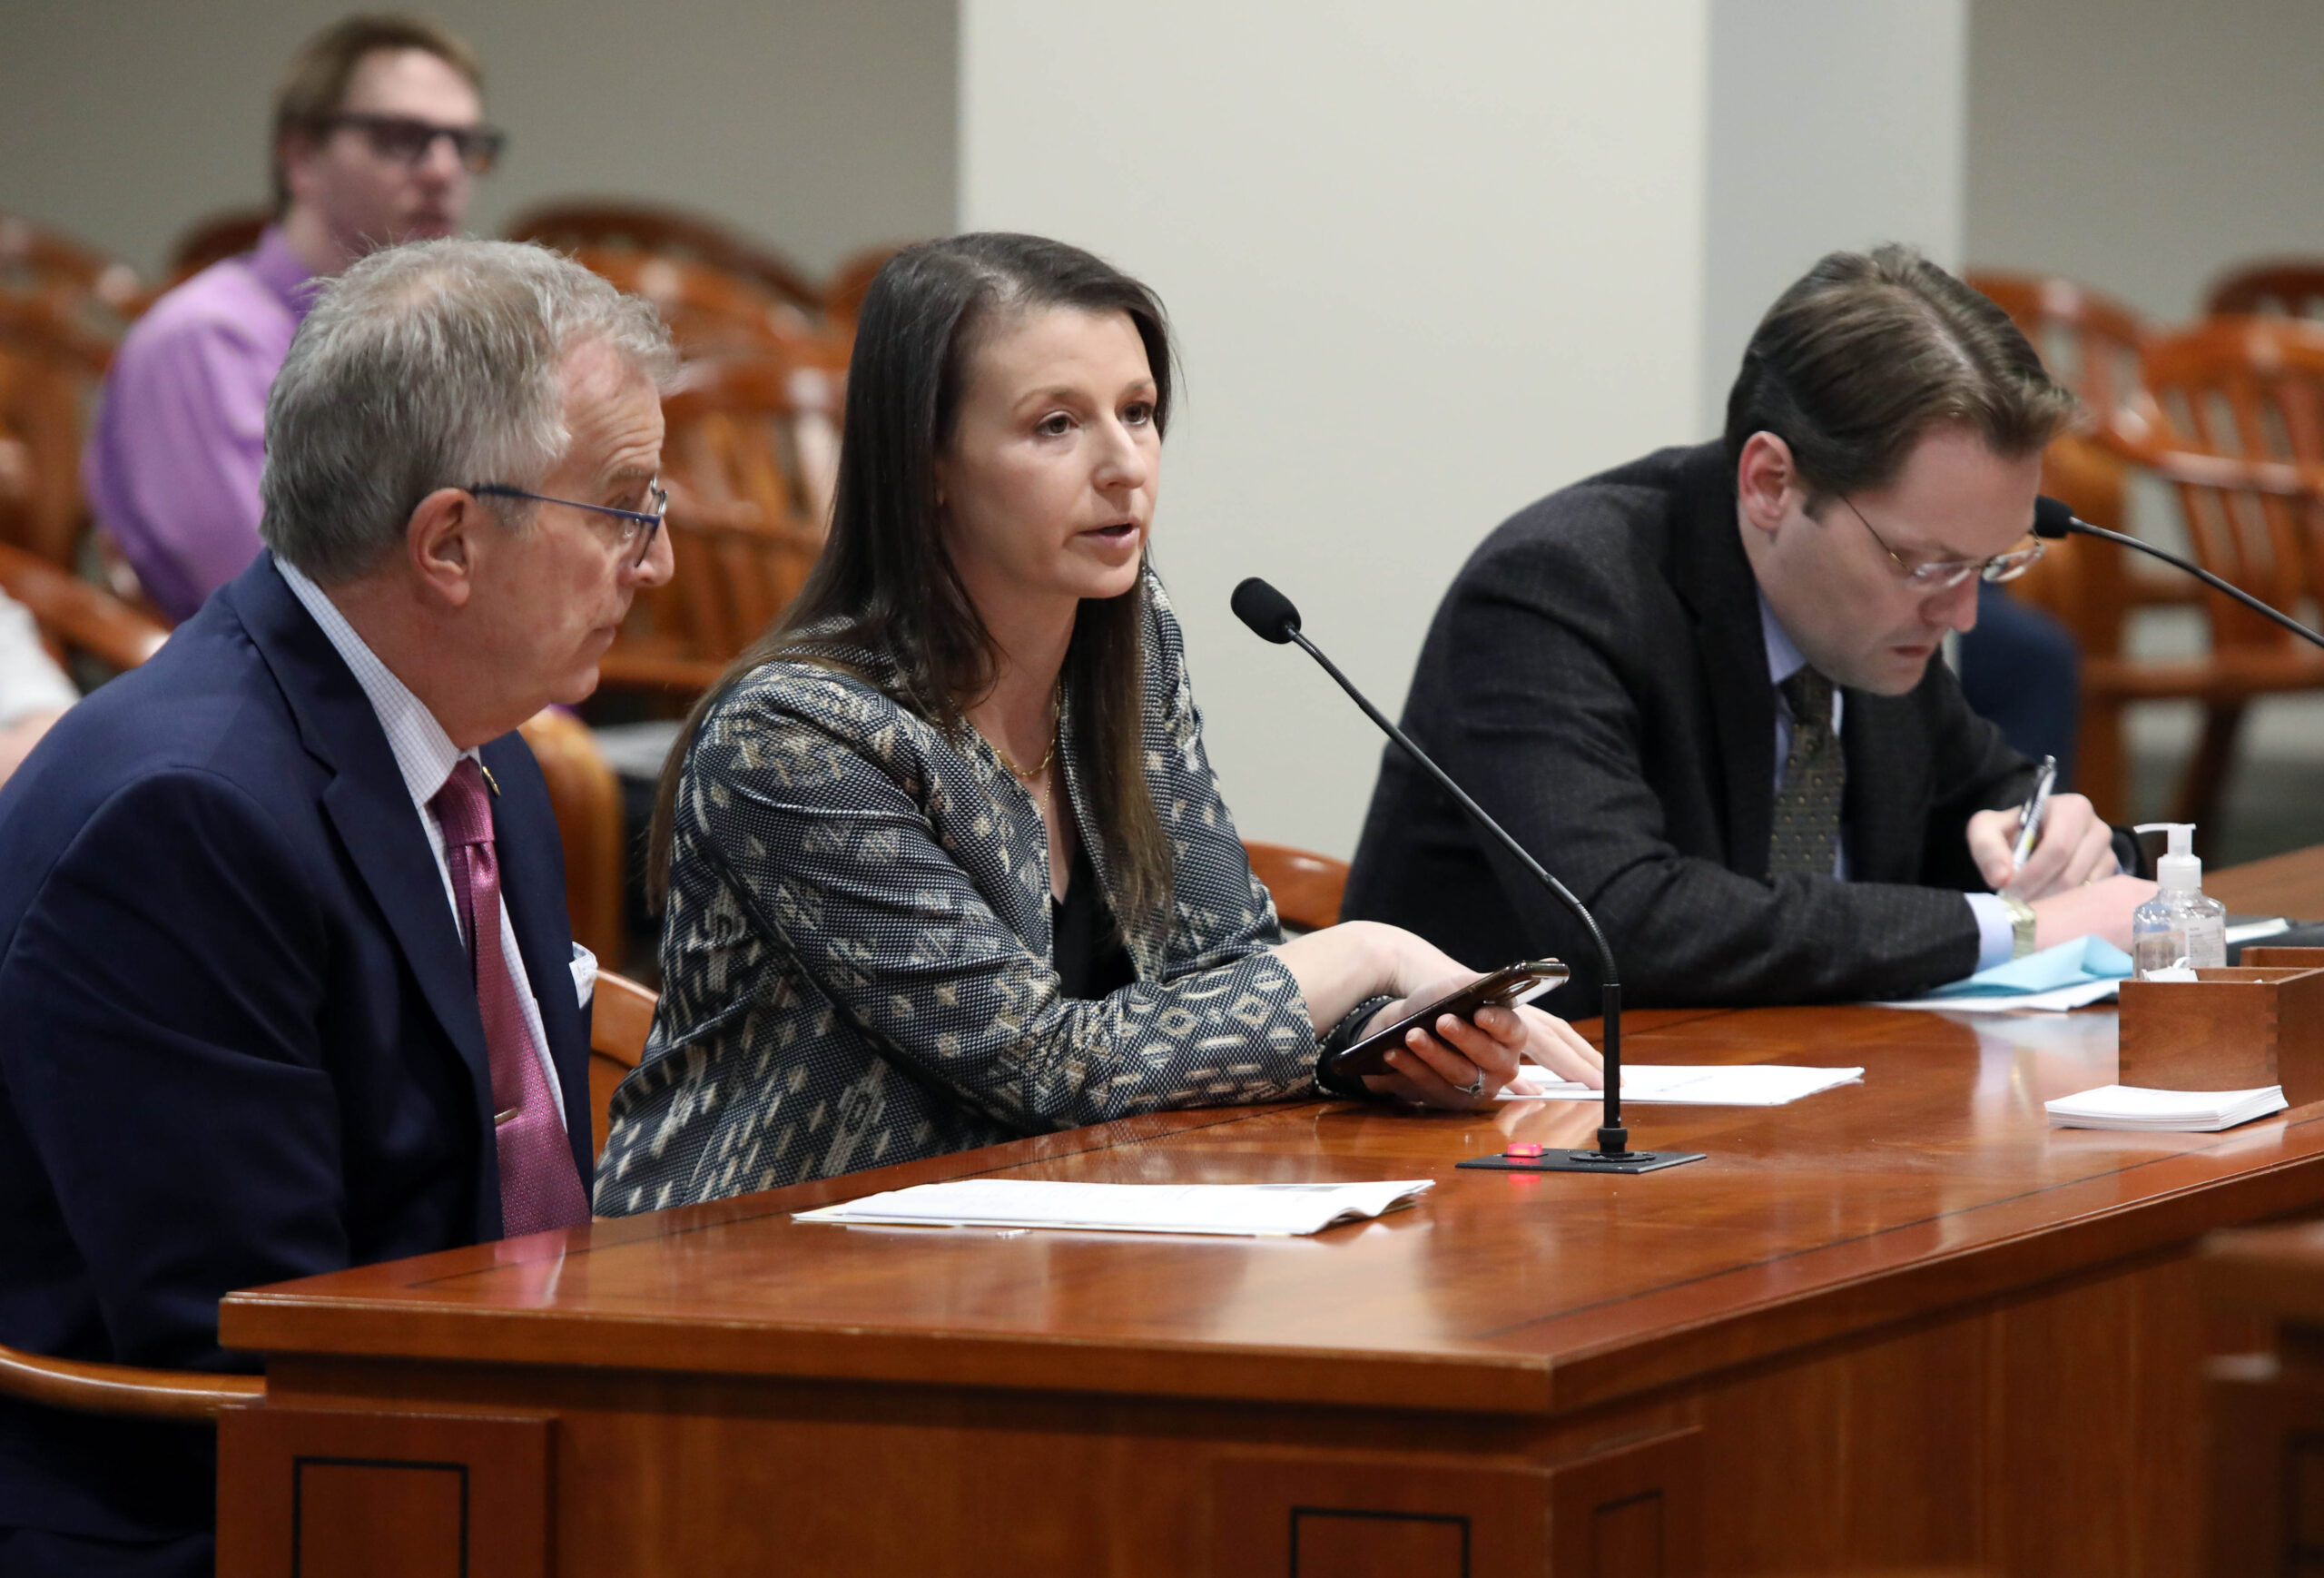 State Rep. Samantha Steckloff (D-Farmington Hills) testified on House Bill 5486, which deals with consumer protection in online marketplaces, in the House Judiciary Committee on March 22, 2022.